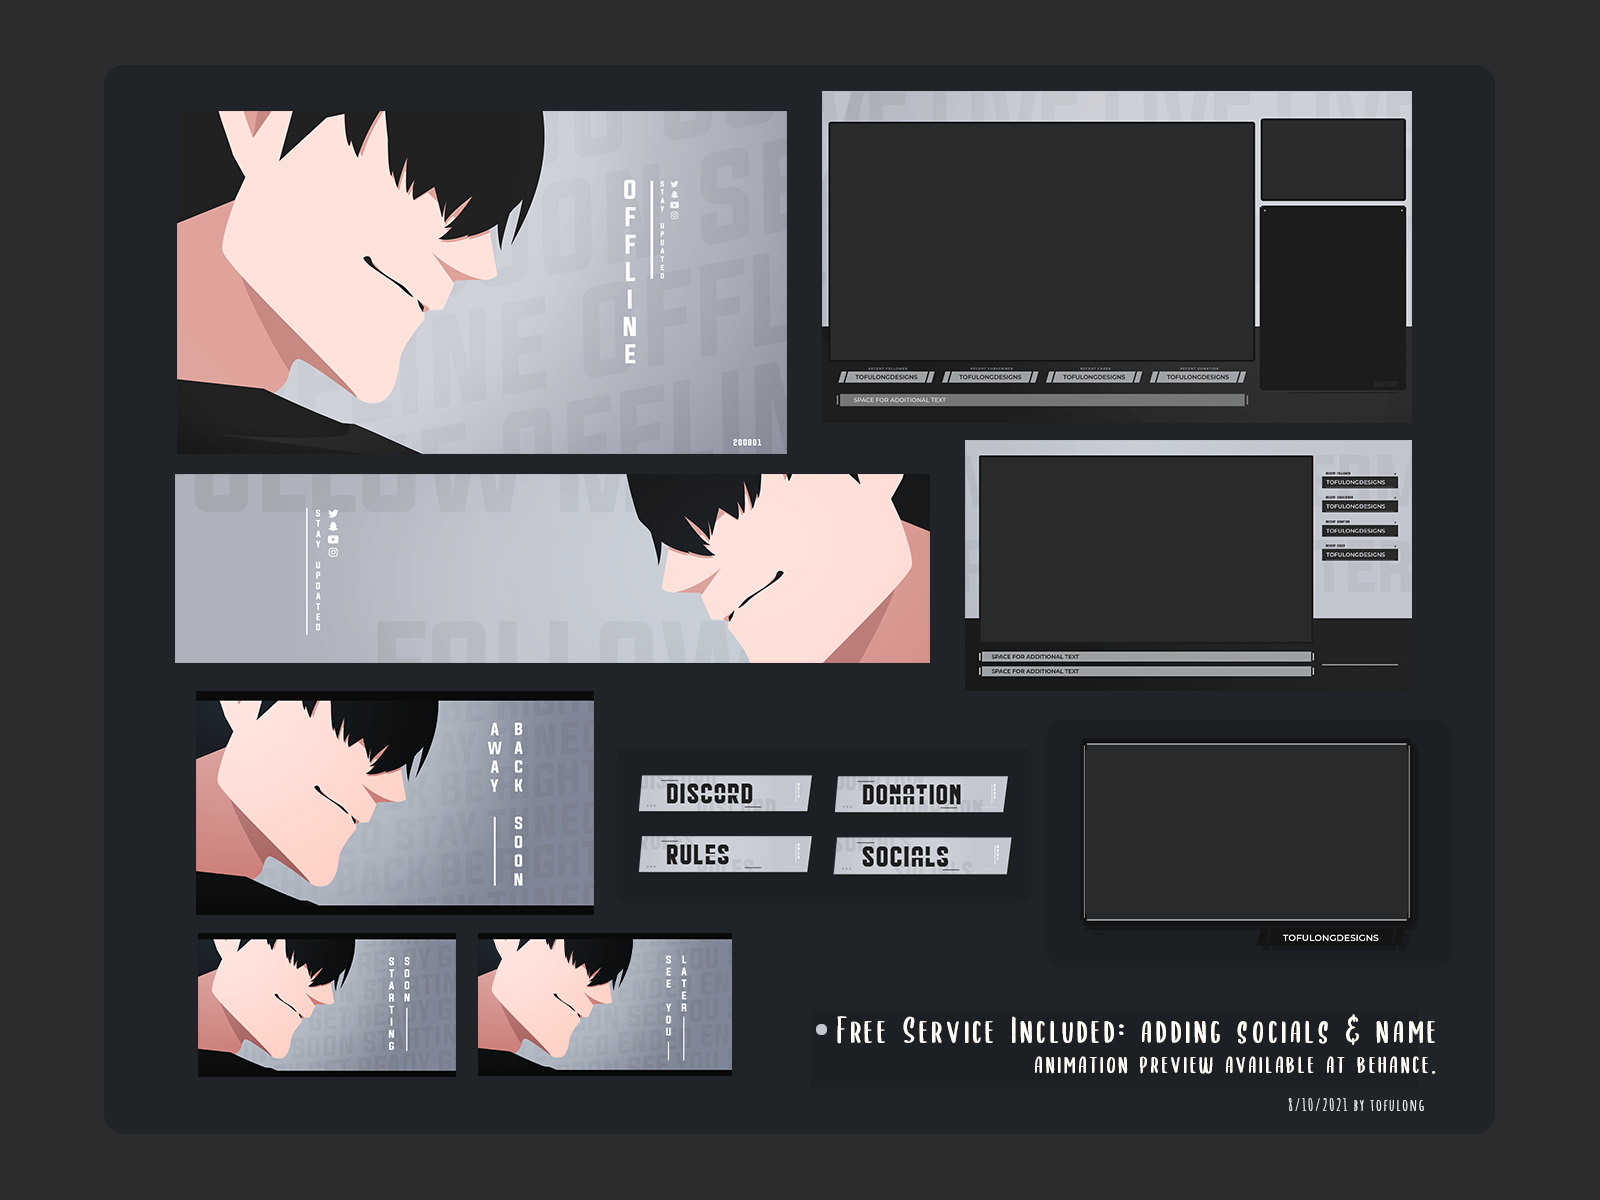 Anime Twitch Overlay Projects  Photos videos logos illustrations and  branding on Behance